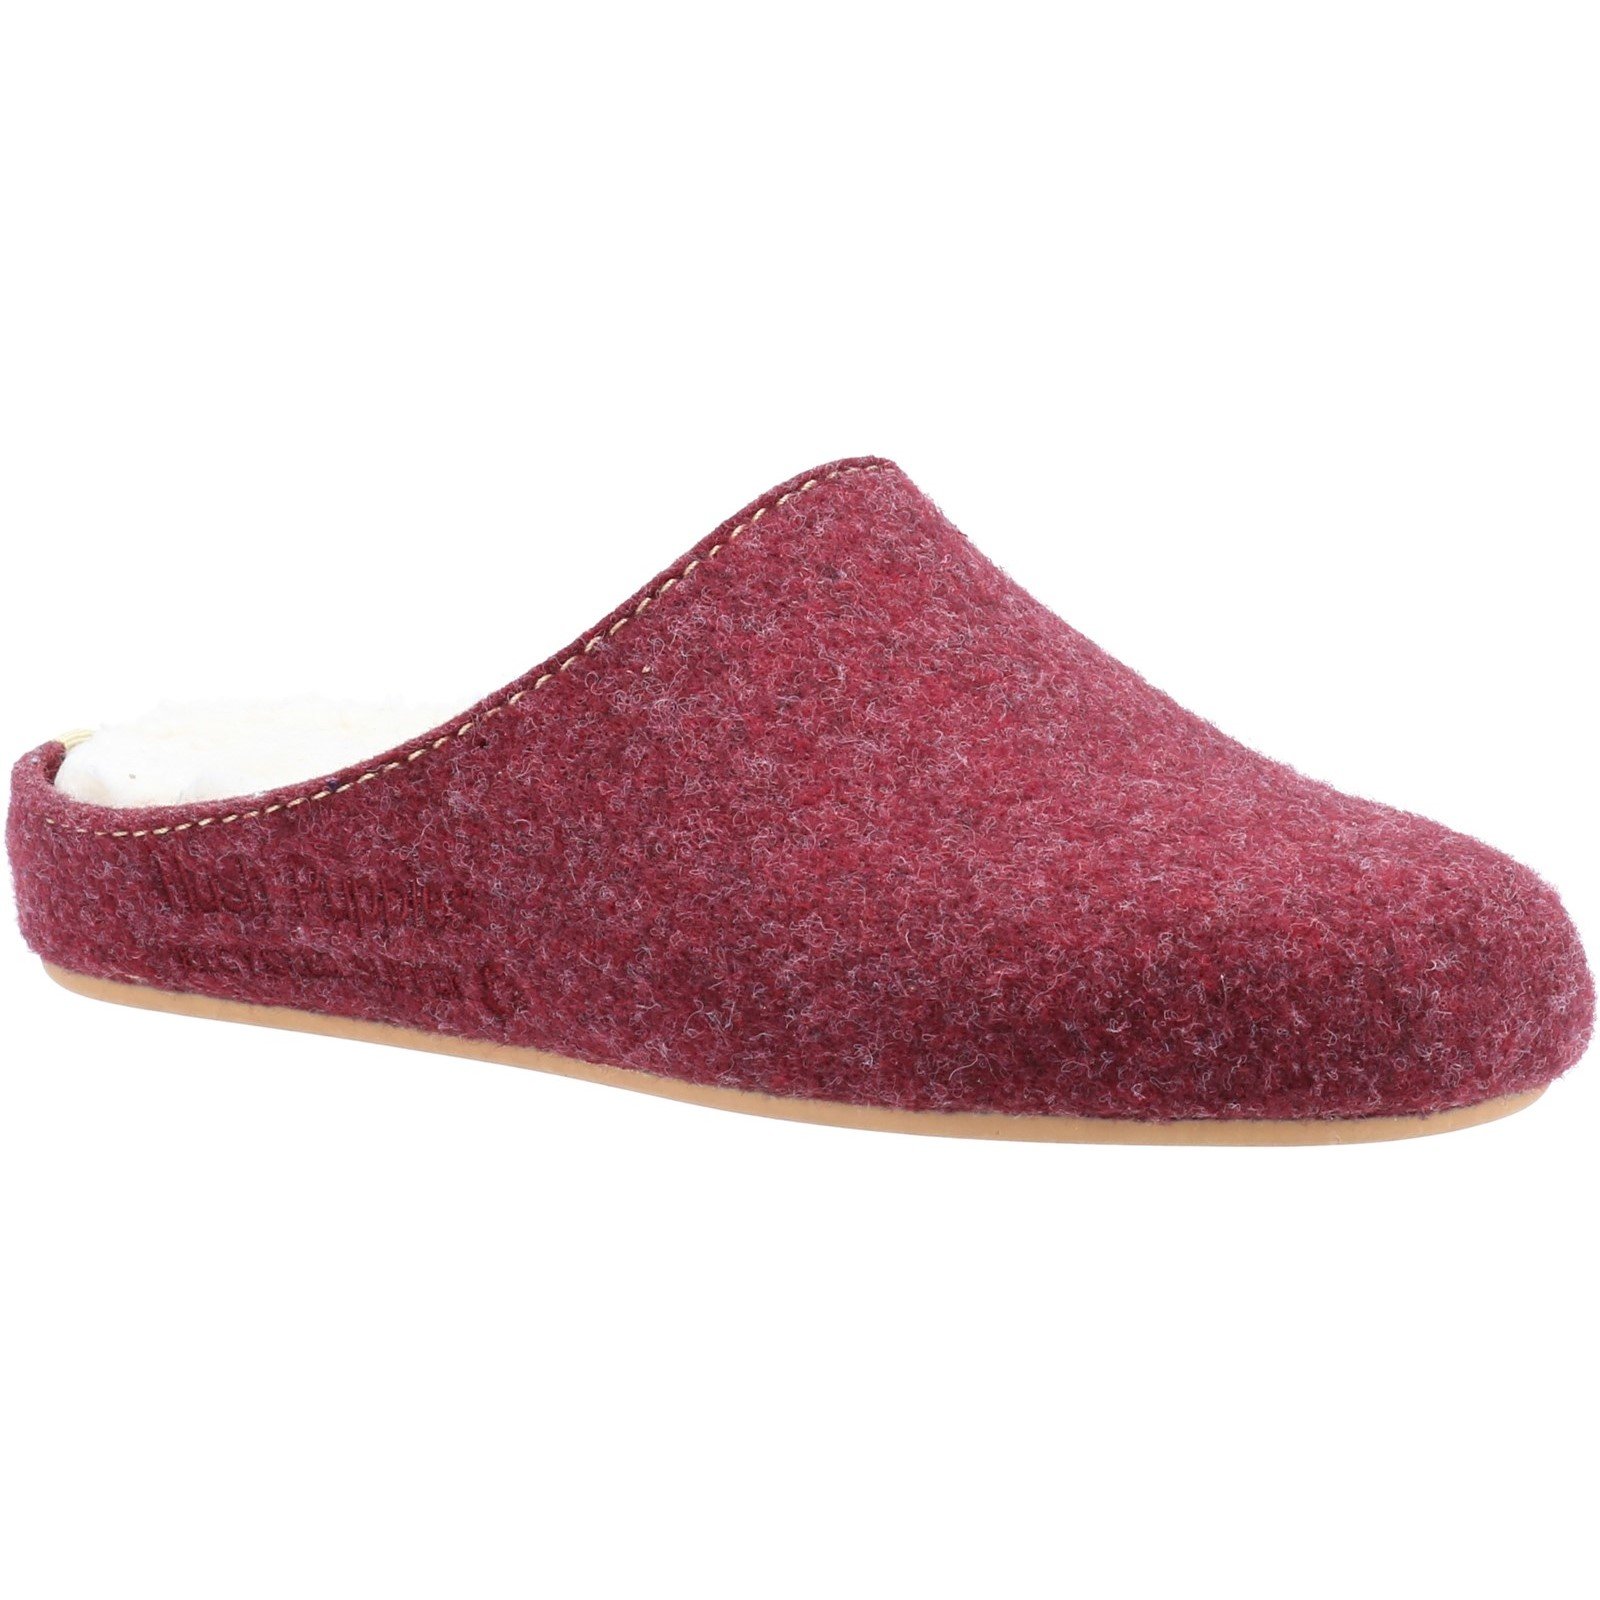 Hush Puppies Women's Remy Slipper Various Colours 32853 - Burgundy 7